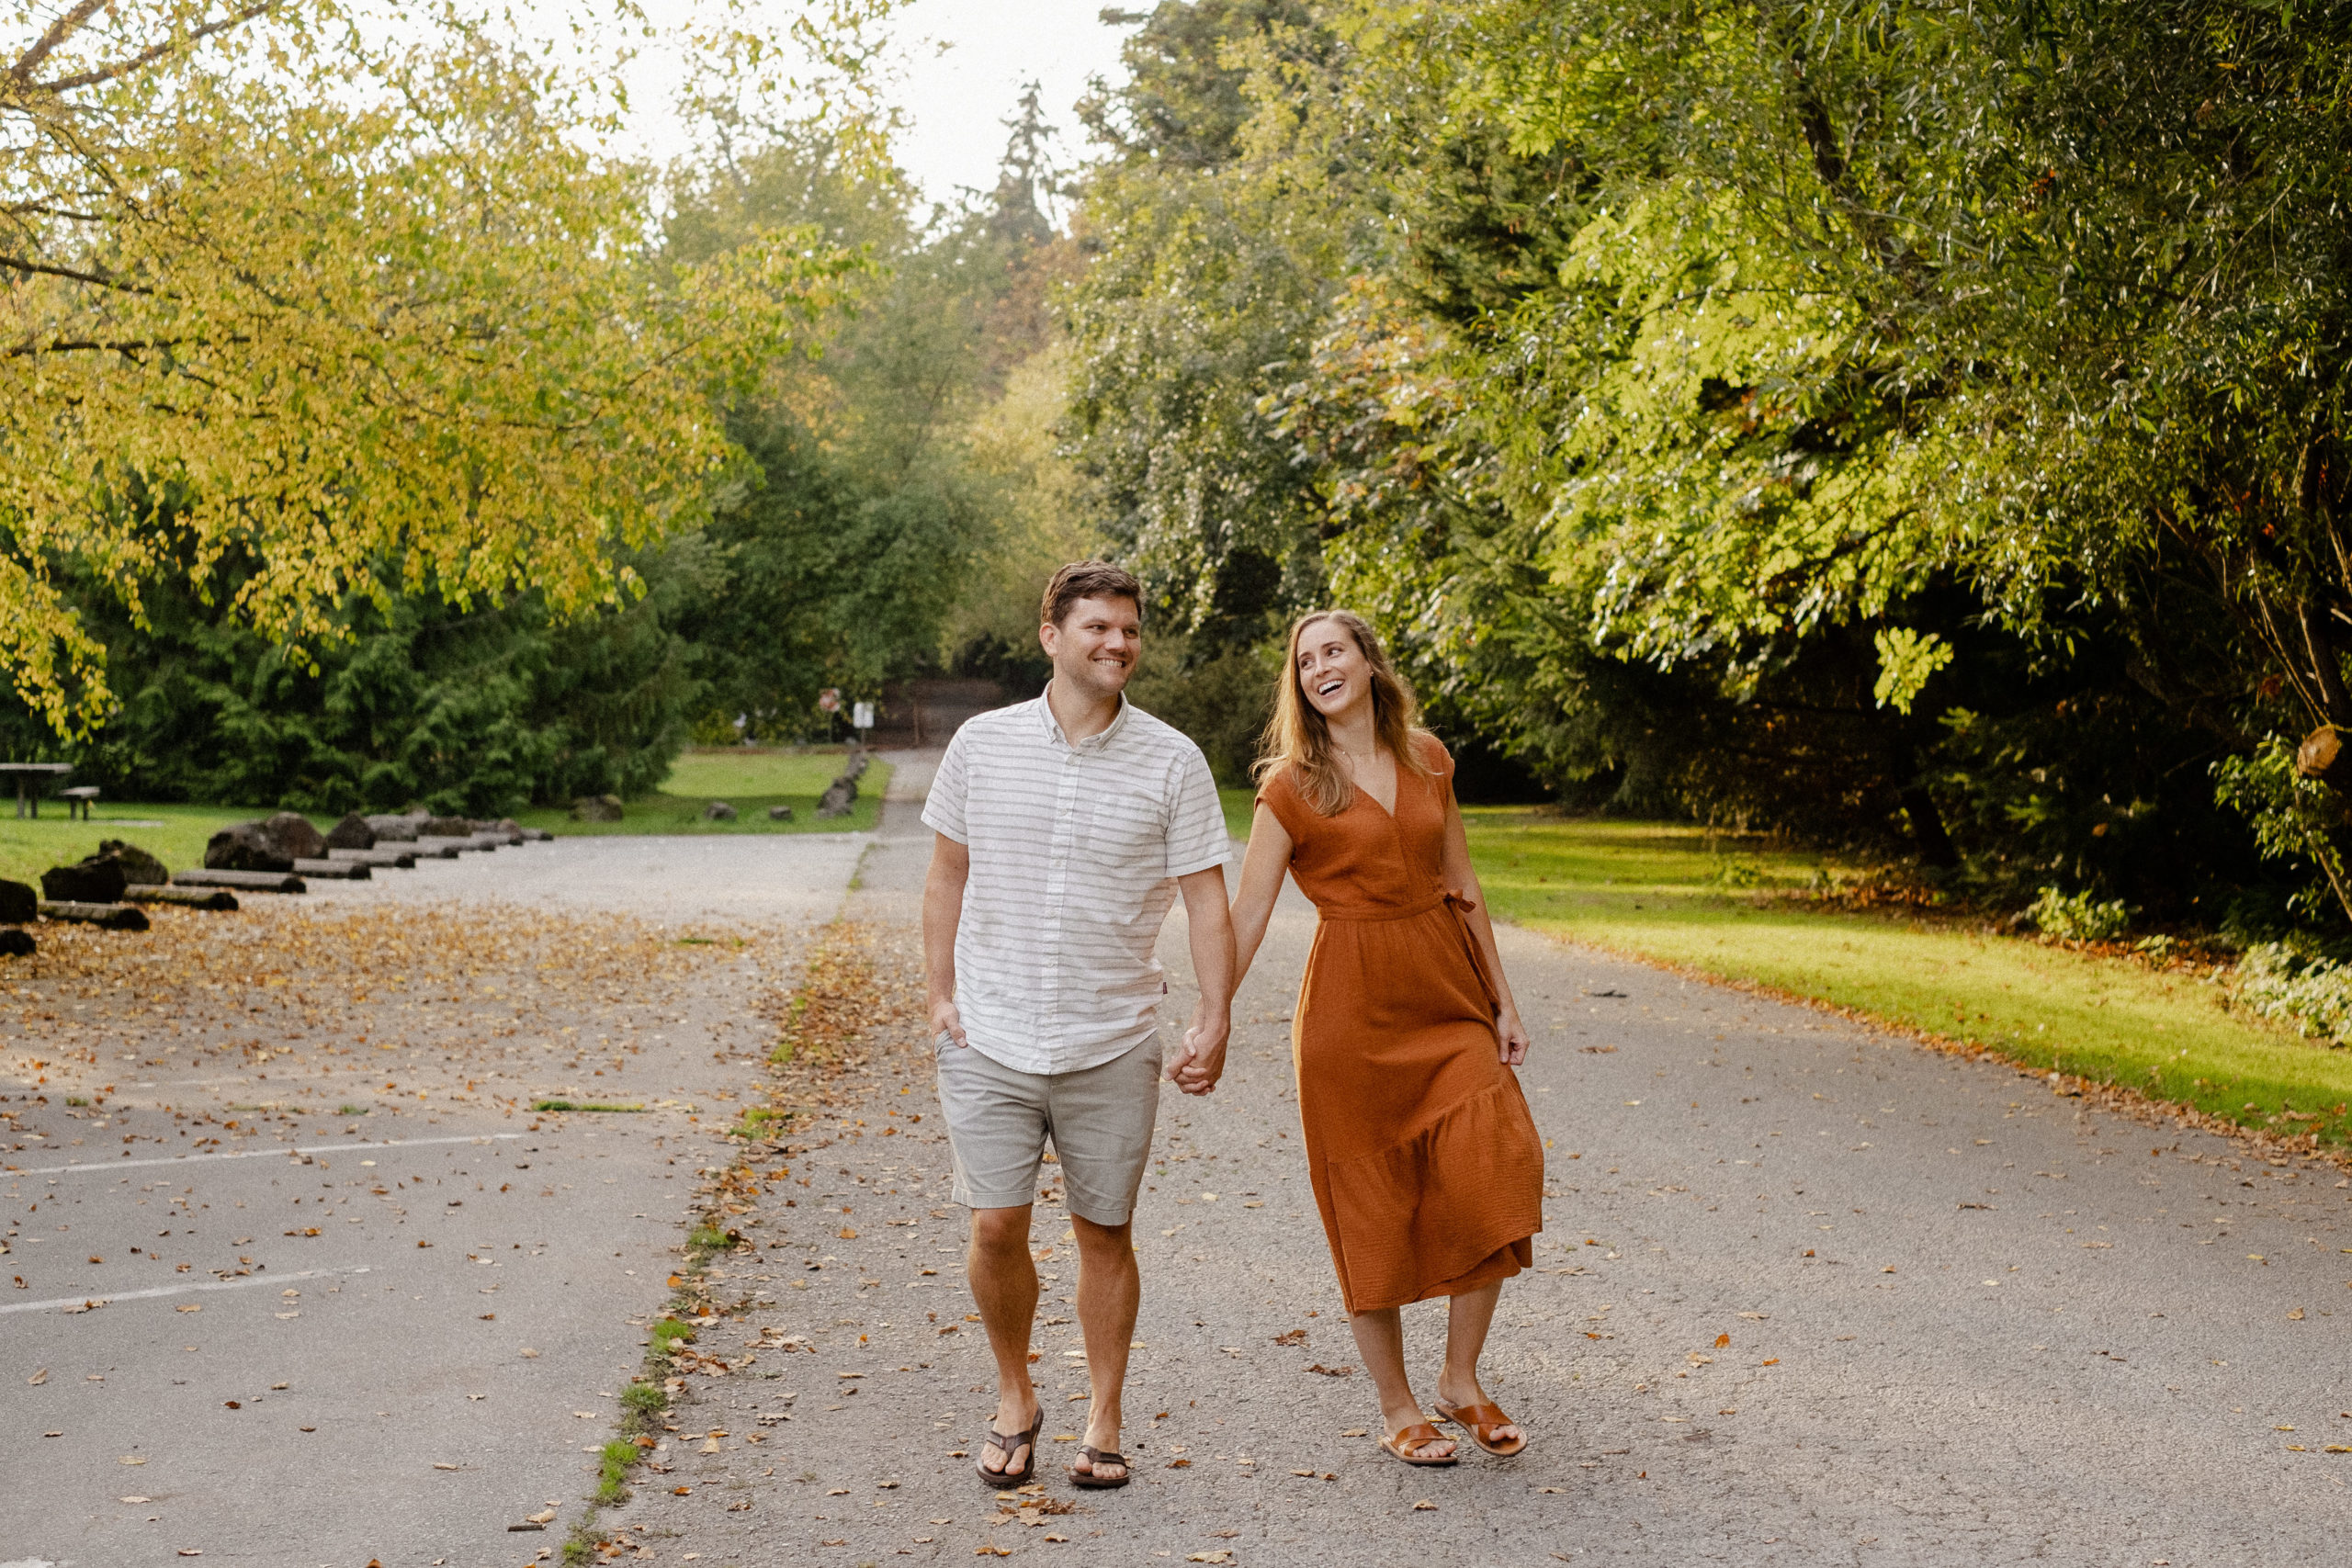 Carkeek Park Engagement Session by Sarah Anne Photography